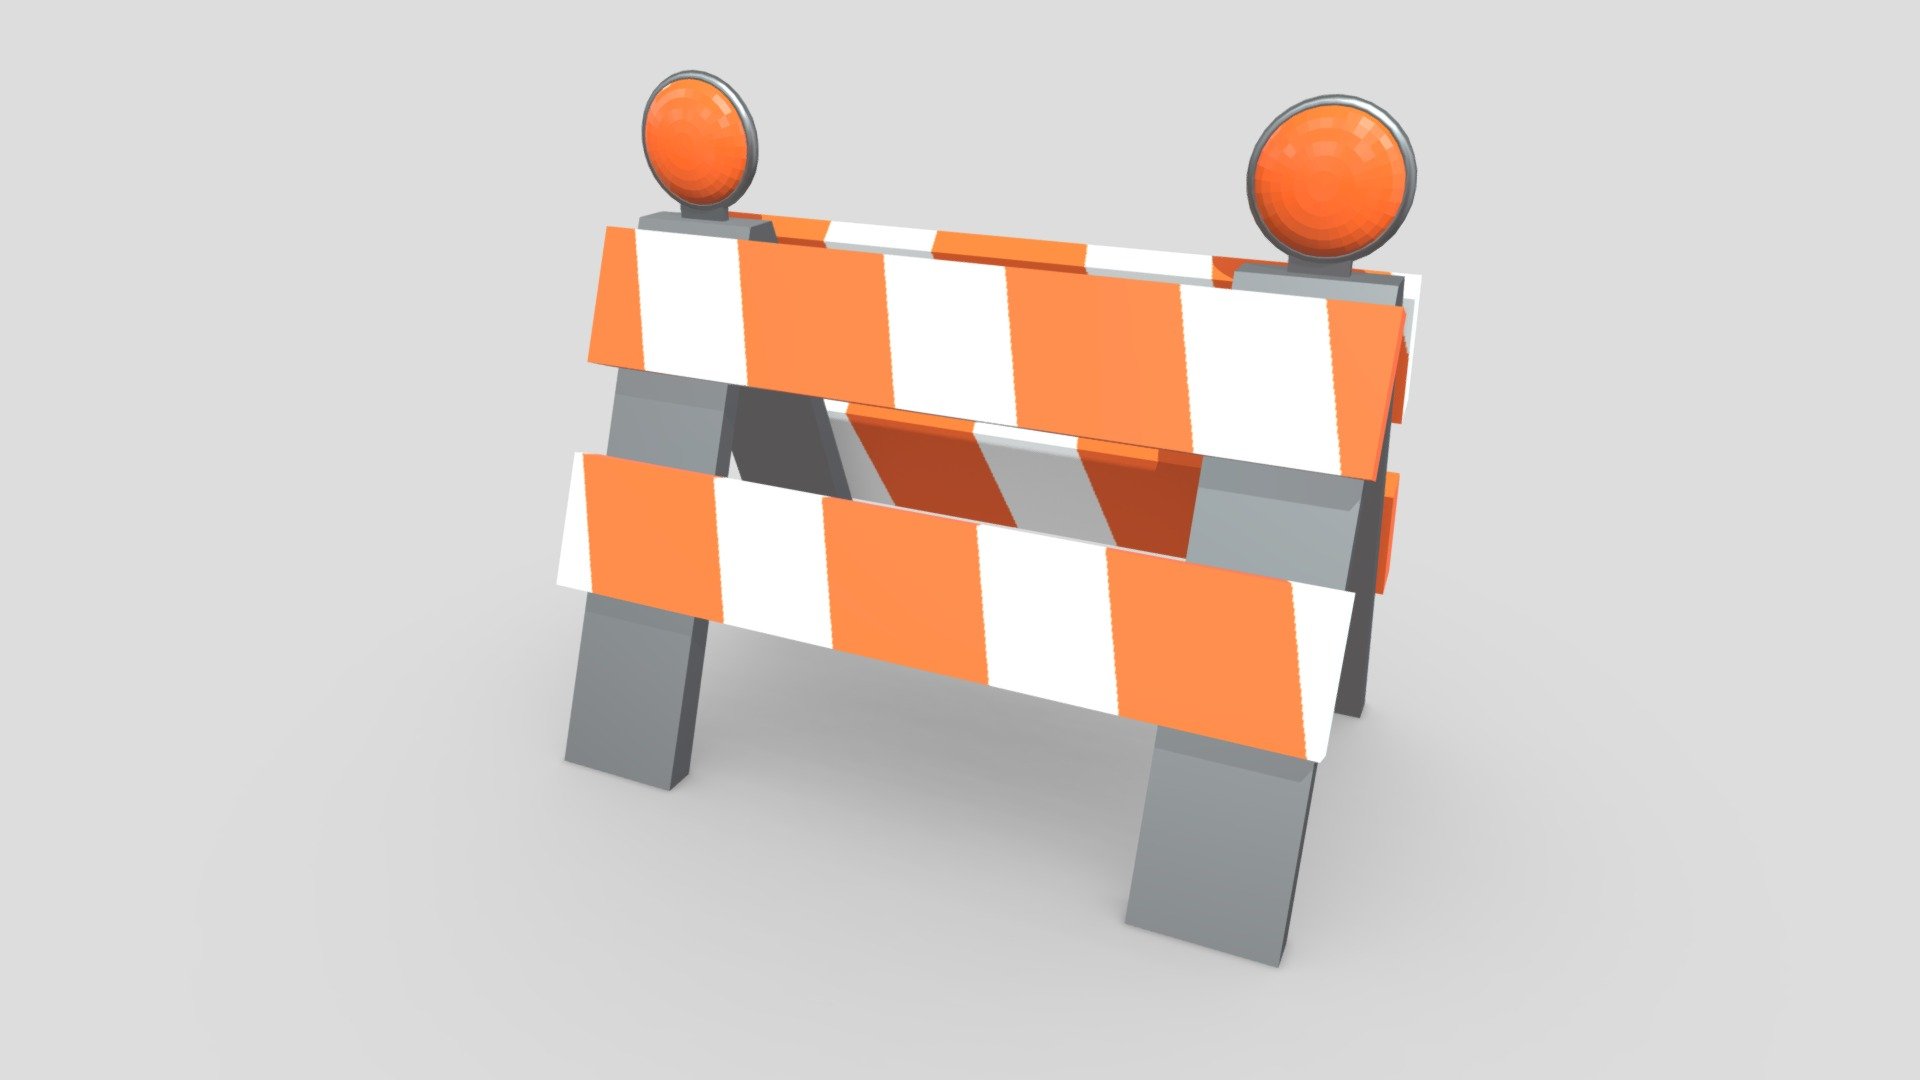 Traffic Barrier that was created using Blender. This is a simple low poly traffic barrier that can be used for things such as construction scenes, or background props in animations or game development. The model has a simple design with signs that represent caution on each side and reflectors at the top. This object was made using the metalness workflow and uses PBR textures.

Features:




Object uses a low poly simple design

Object uses the metalness workflow and 2K PBR textures in PNG format

Object has been manually UV unwrapped to match its PBR textures

Blend file includes pre-applied textures, lighting and camera setups

Object has been exported in 4 file formats (FBX, OBJ, GLTF/GLB, DAE/Collada)

Included Textures:




AO, Diffuse, Roughness, Gloss

UVLayout

The source file that is uploaded is for demonstration use and is uploaded in FBX format. In the additional file you will find all model exports and the textures that go along with them 3d model